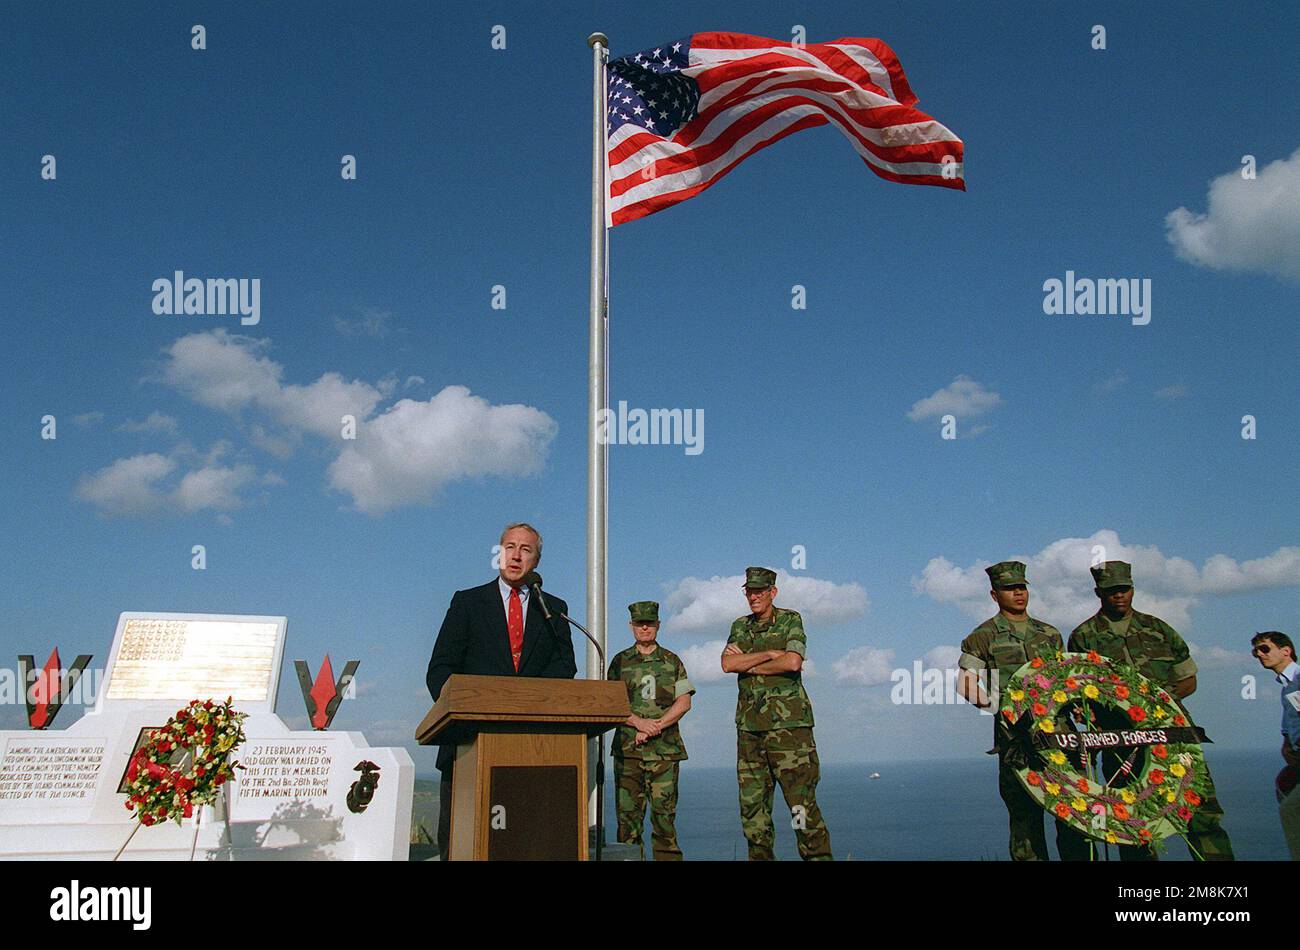 Secretary of the Navy John H. Dalton addresses a large group of active duty military and veterans attending the 50th anniversary memorial ceremony atop Mount Suribachi. He stated 'Honor, courage, commitment as words, they are easy to say. Here on Iwo Jima, they were turned into deeds, deeds that will forever guide the Naval service'. Also present for the ceremony were General Carl E. Mundy, Jr. Commandant of the Marine Corps (rear left) and Admiral Richard C. Macke, Commander-In-CHIEF, U.S. Pacific Command (rear left). Base: Iwo Jima Country: Japan (JPN) Stock Photo